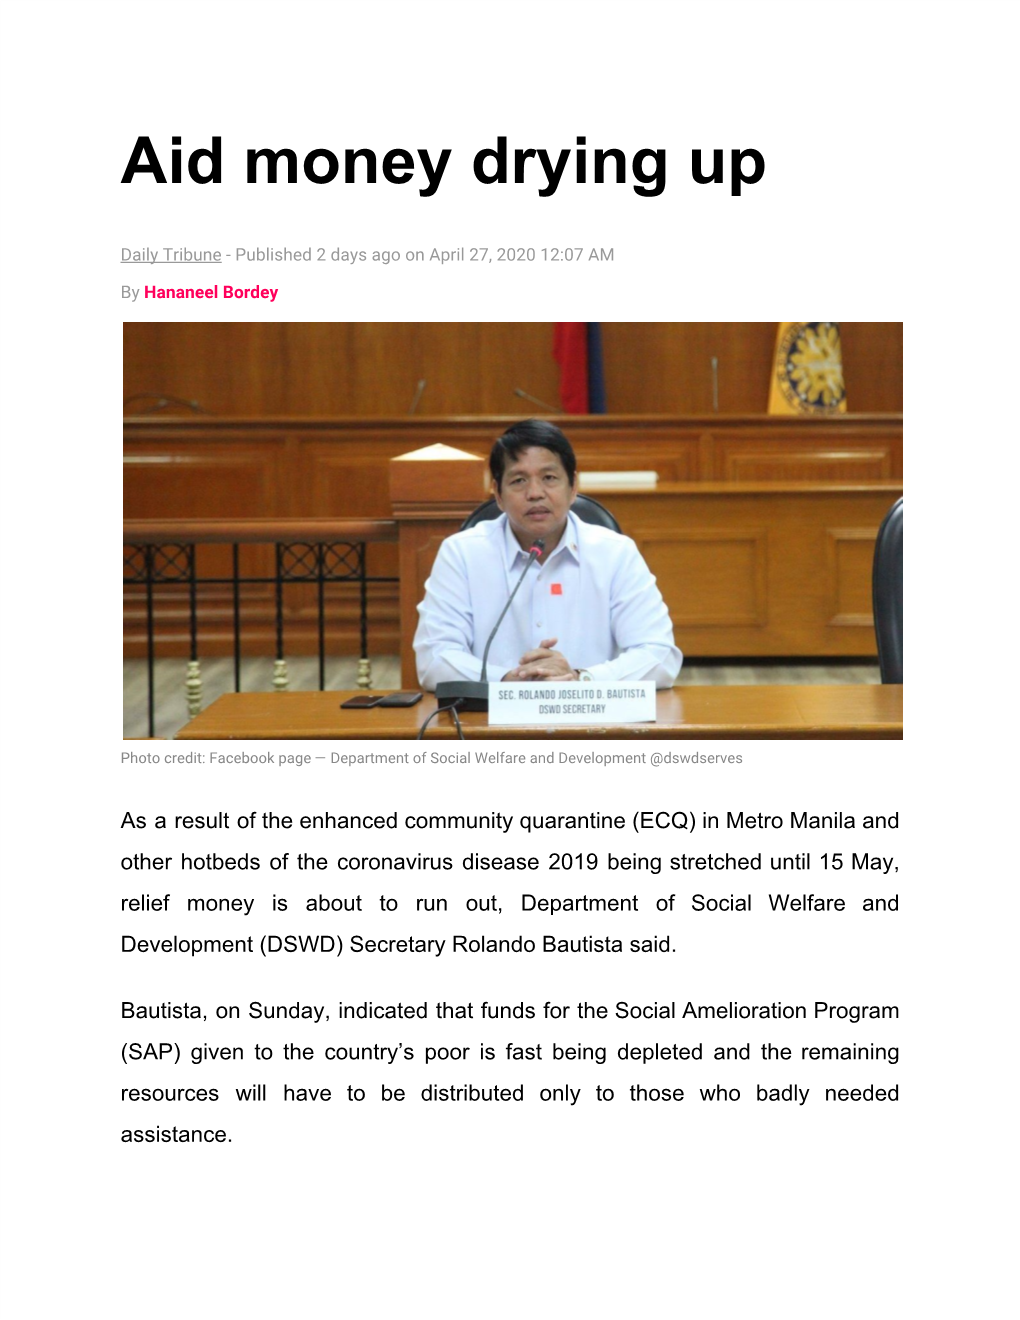 Aid Money Drying Up